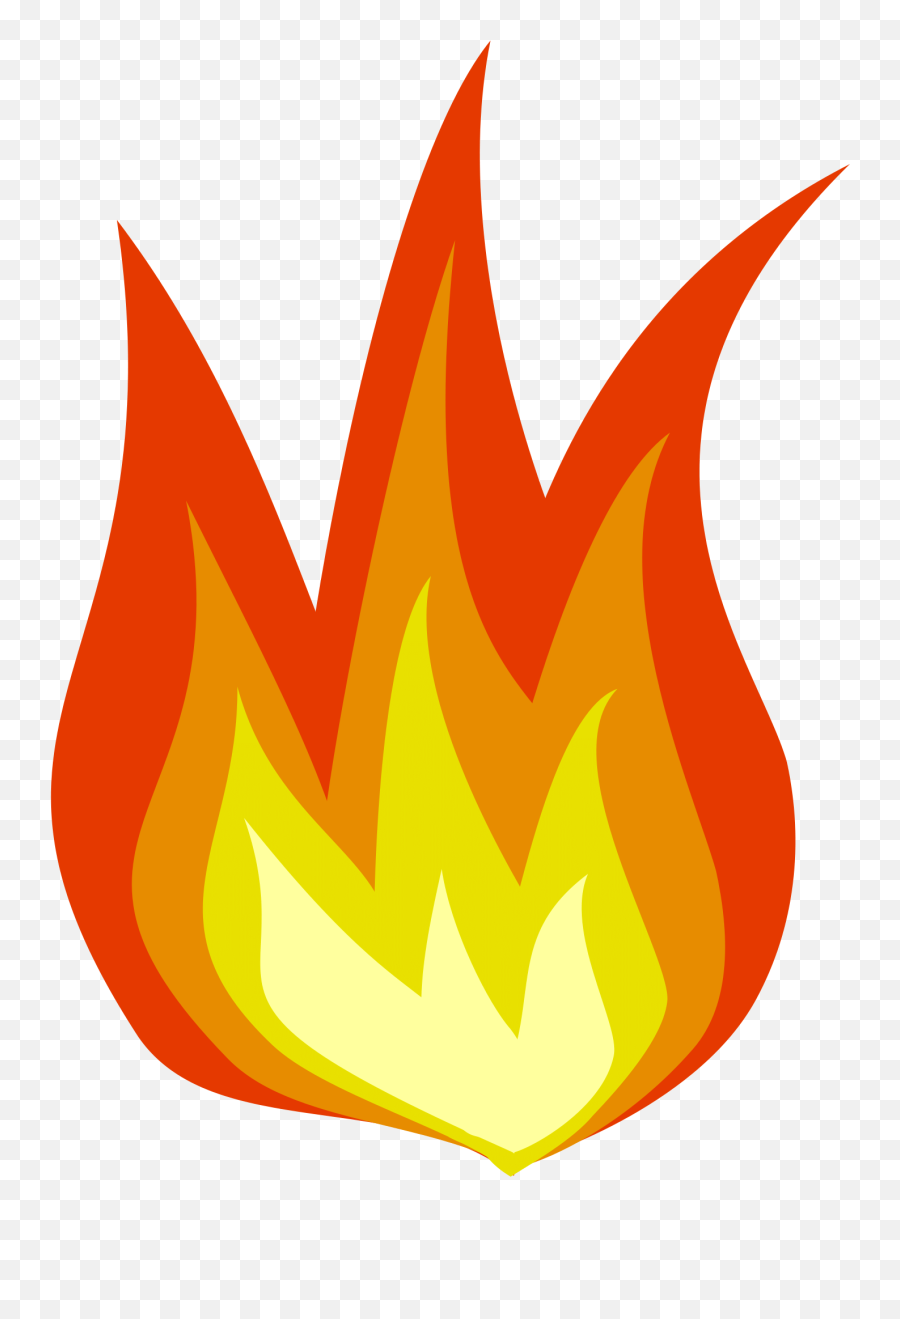 Animated Fire Png Transparent Images - Transparent Background Fire Clipart Emoji,Fire Png Transparent